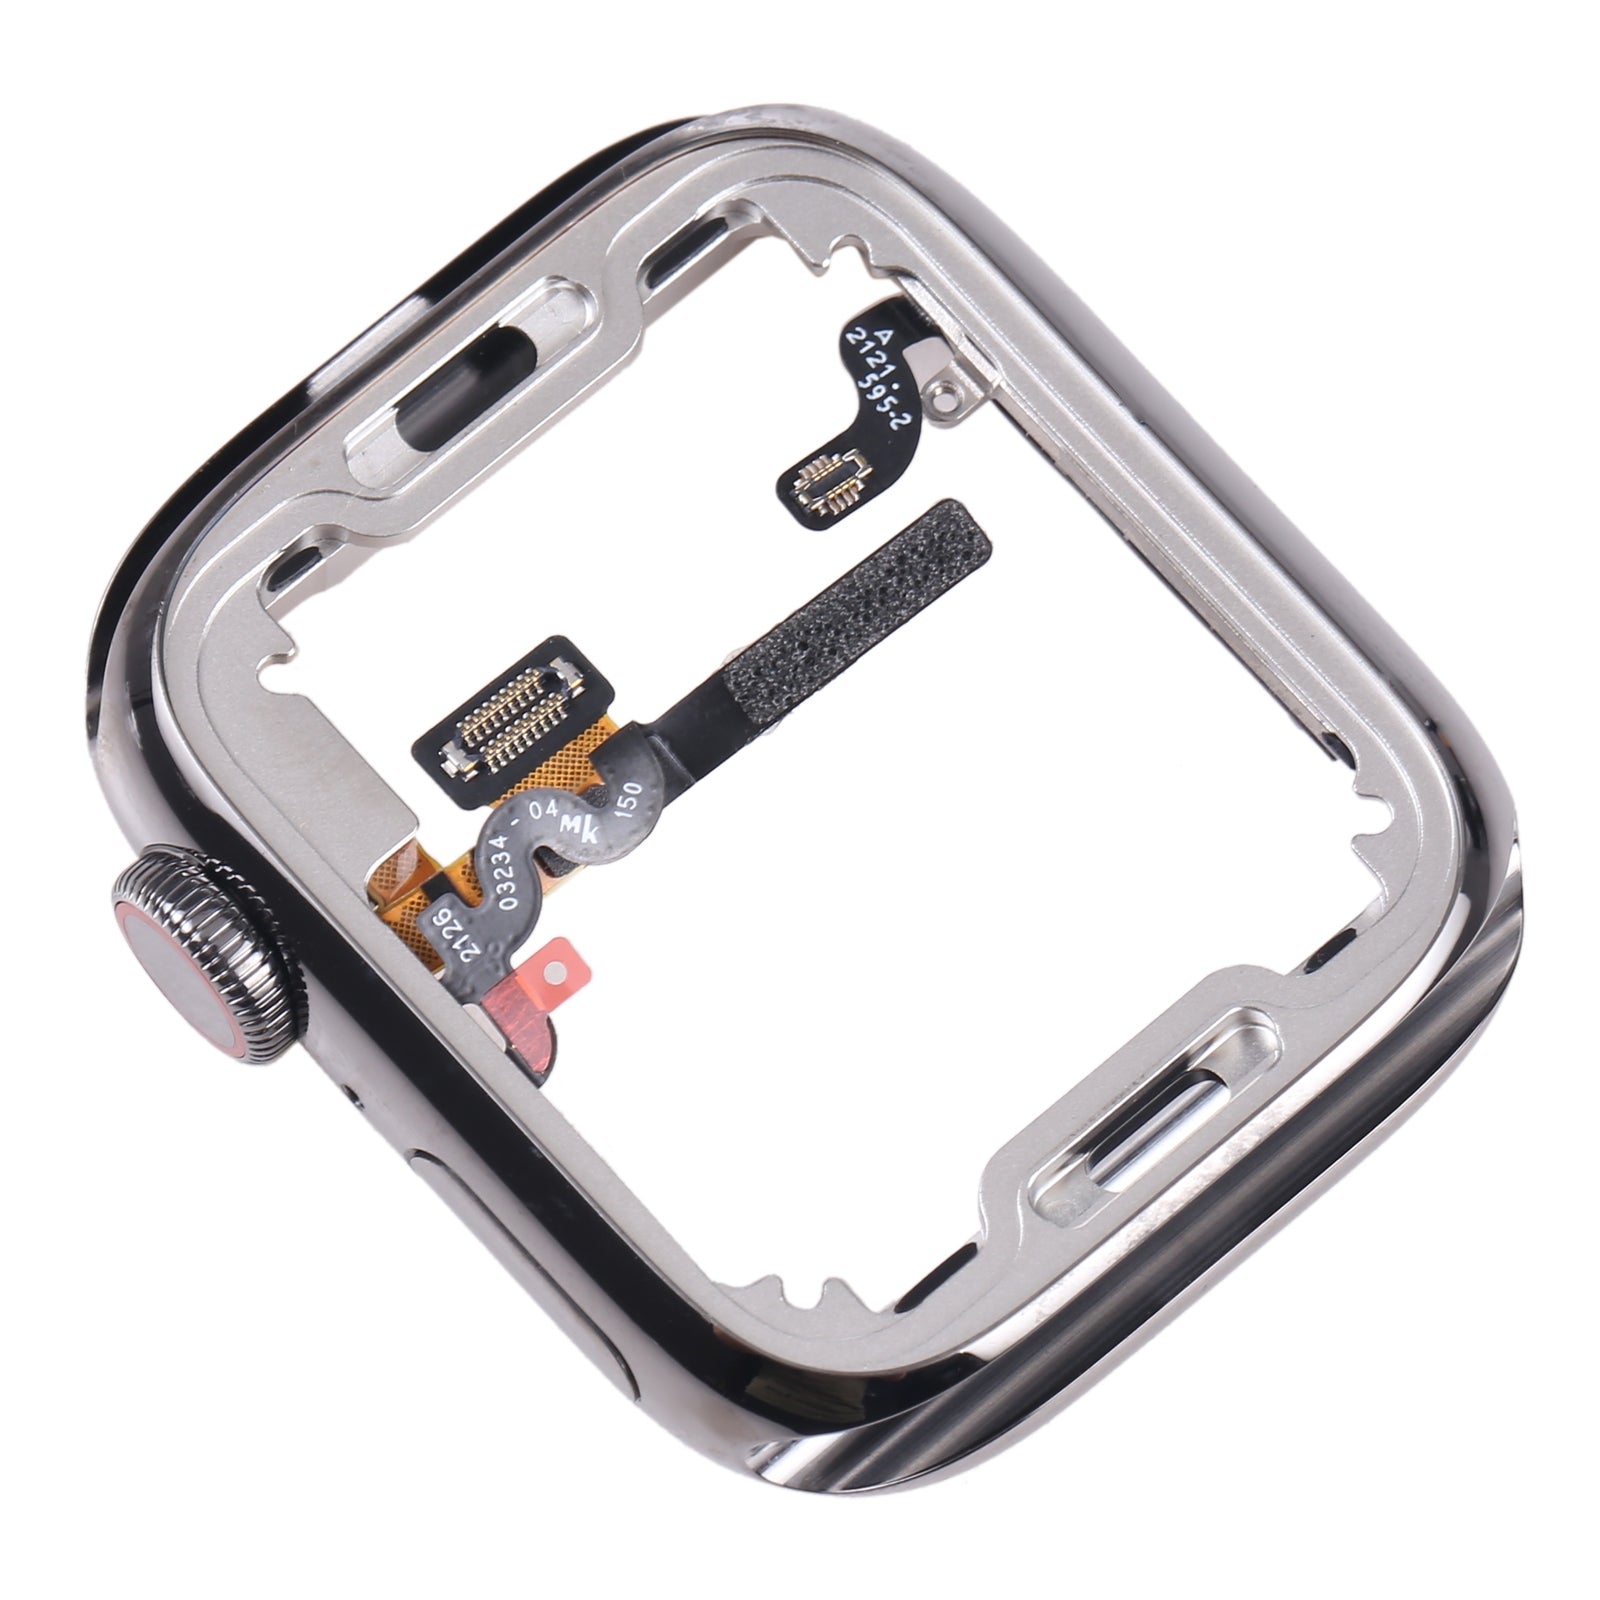 LCD Intermediate Frame Chassis Apple Watch Series 7 41mm